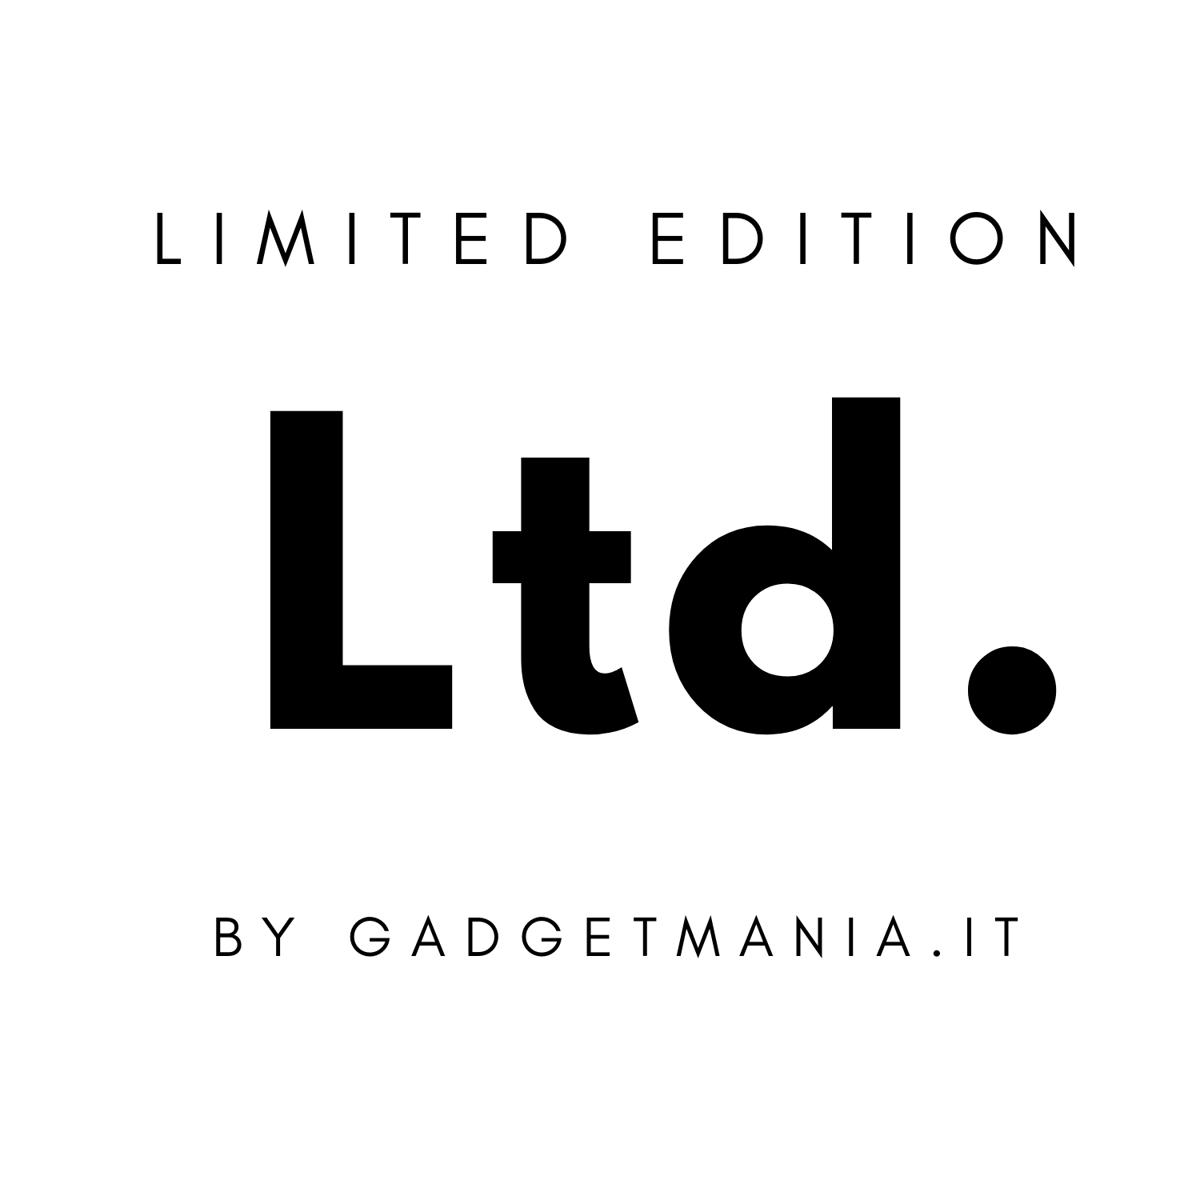 Limited Edition by gadgetmania.it